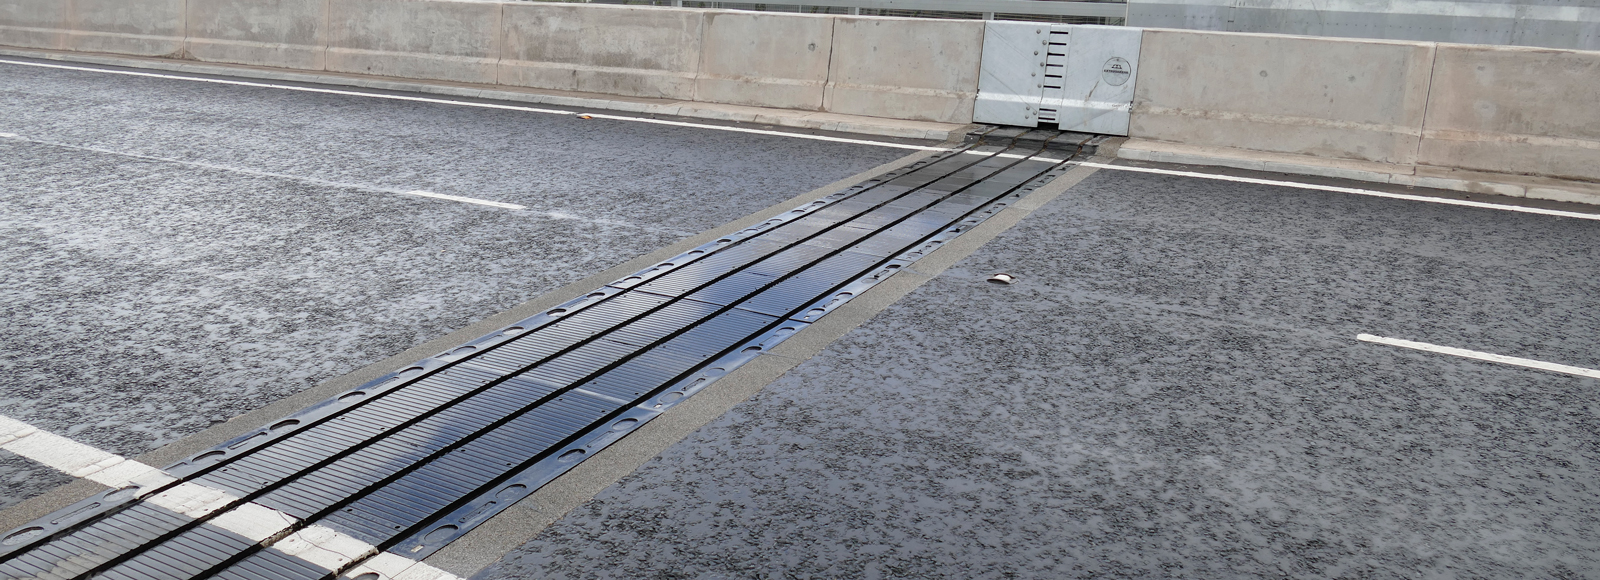 expansion joints